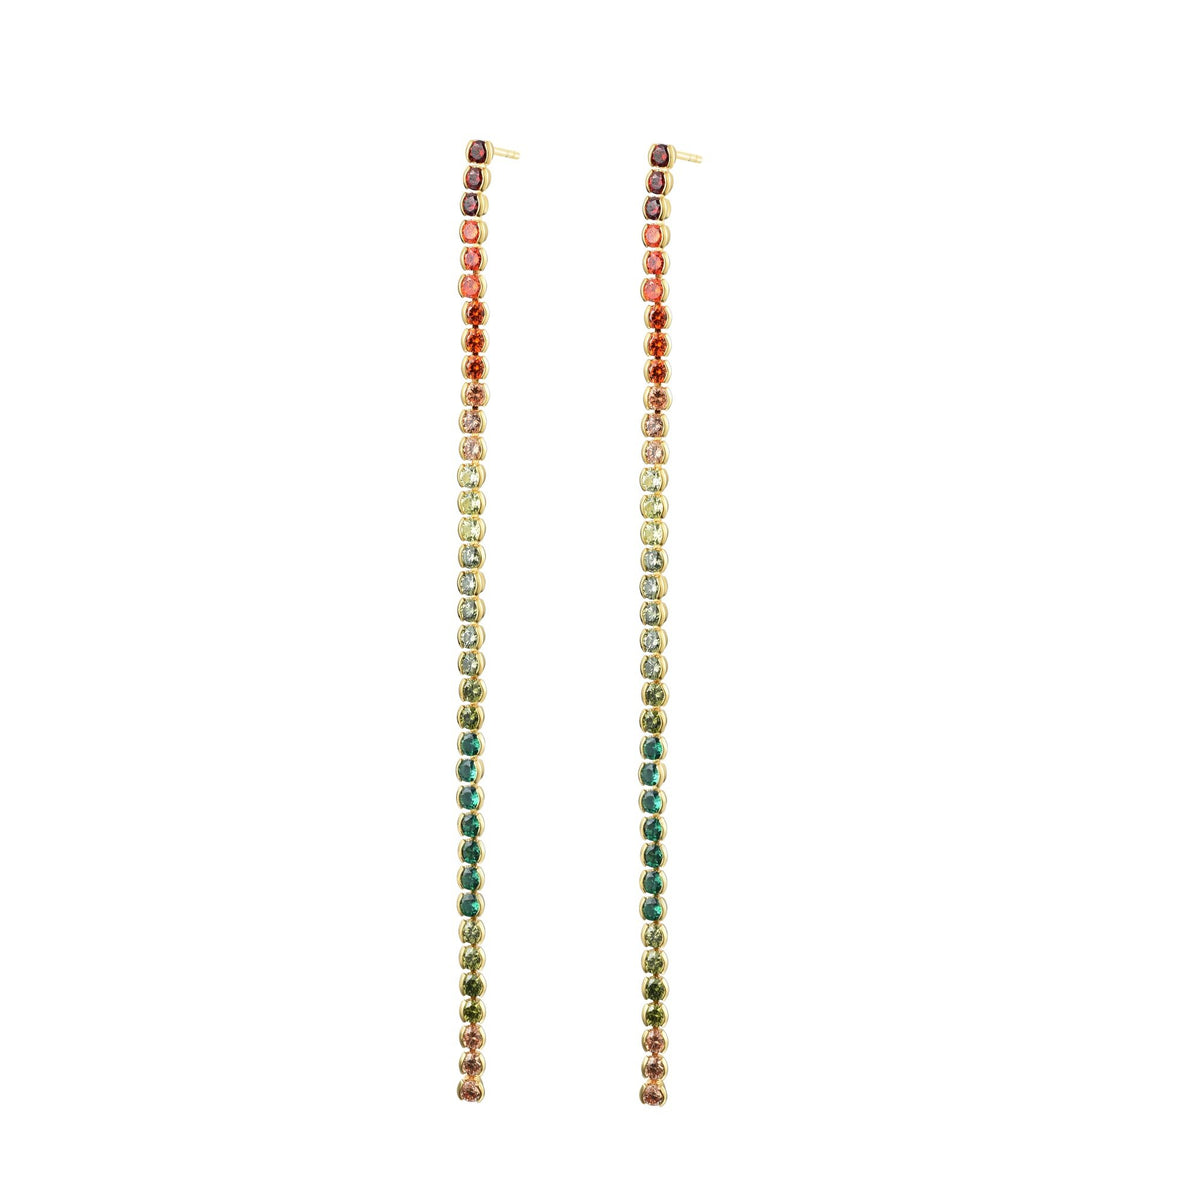 Ferentina | Macaron Earrings | 925 Silver | Multicolor CZ | 18K Gold Plated